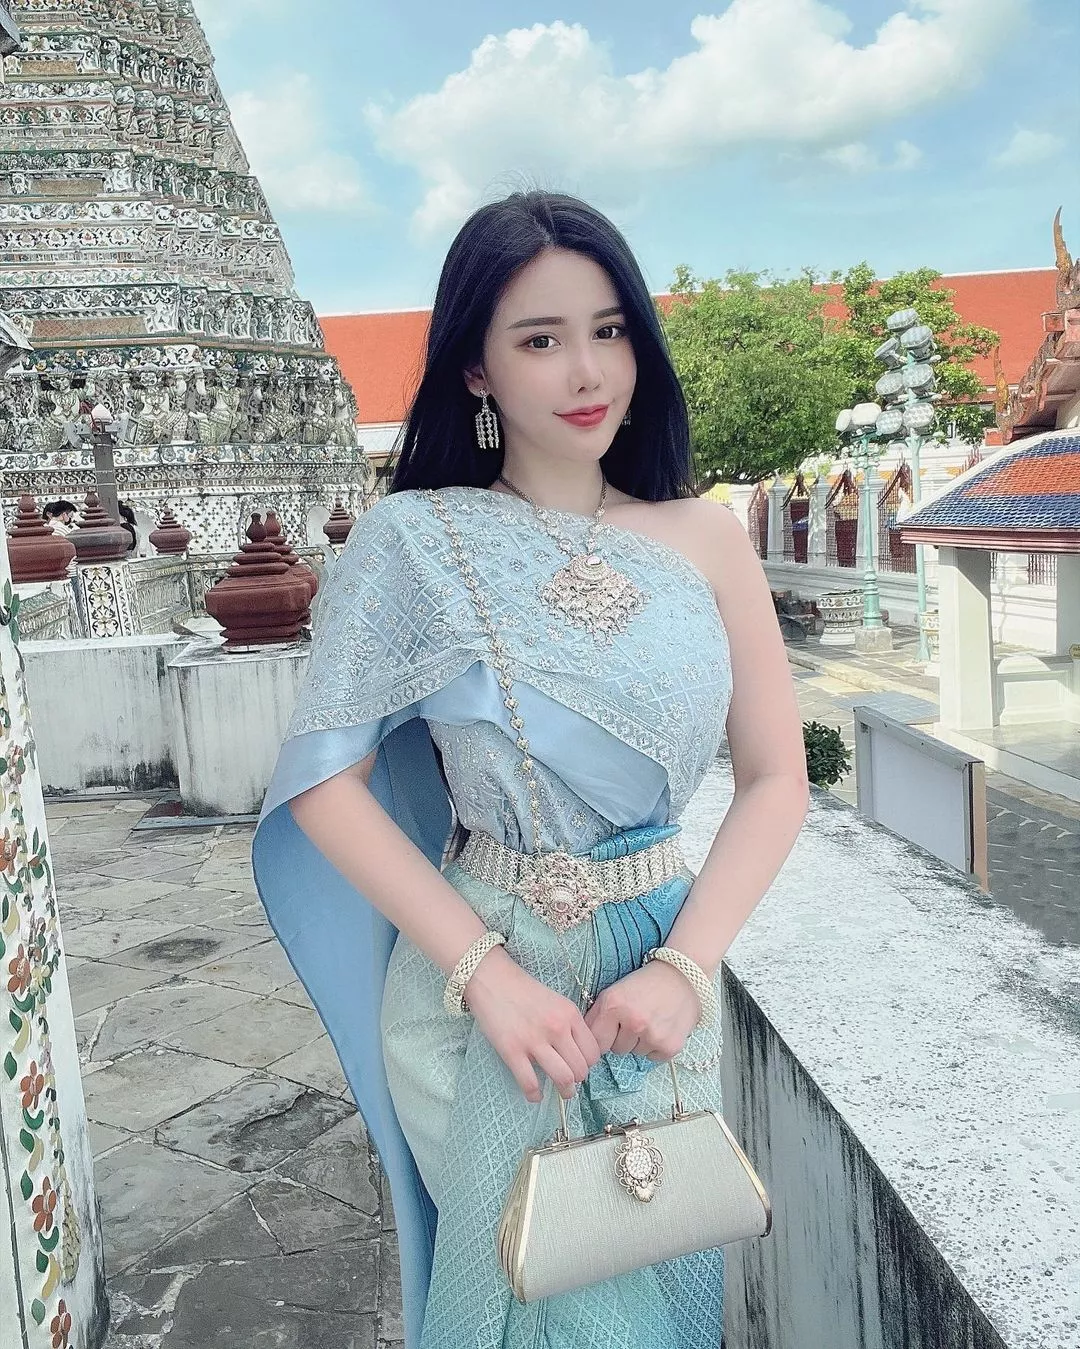 jenna chew in traditional costume